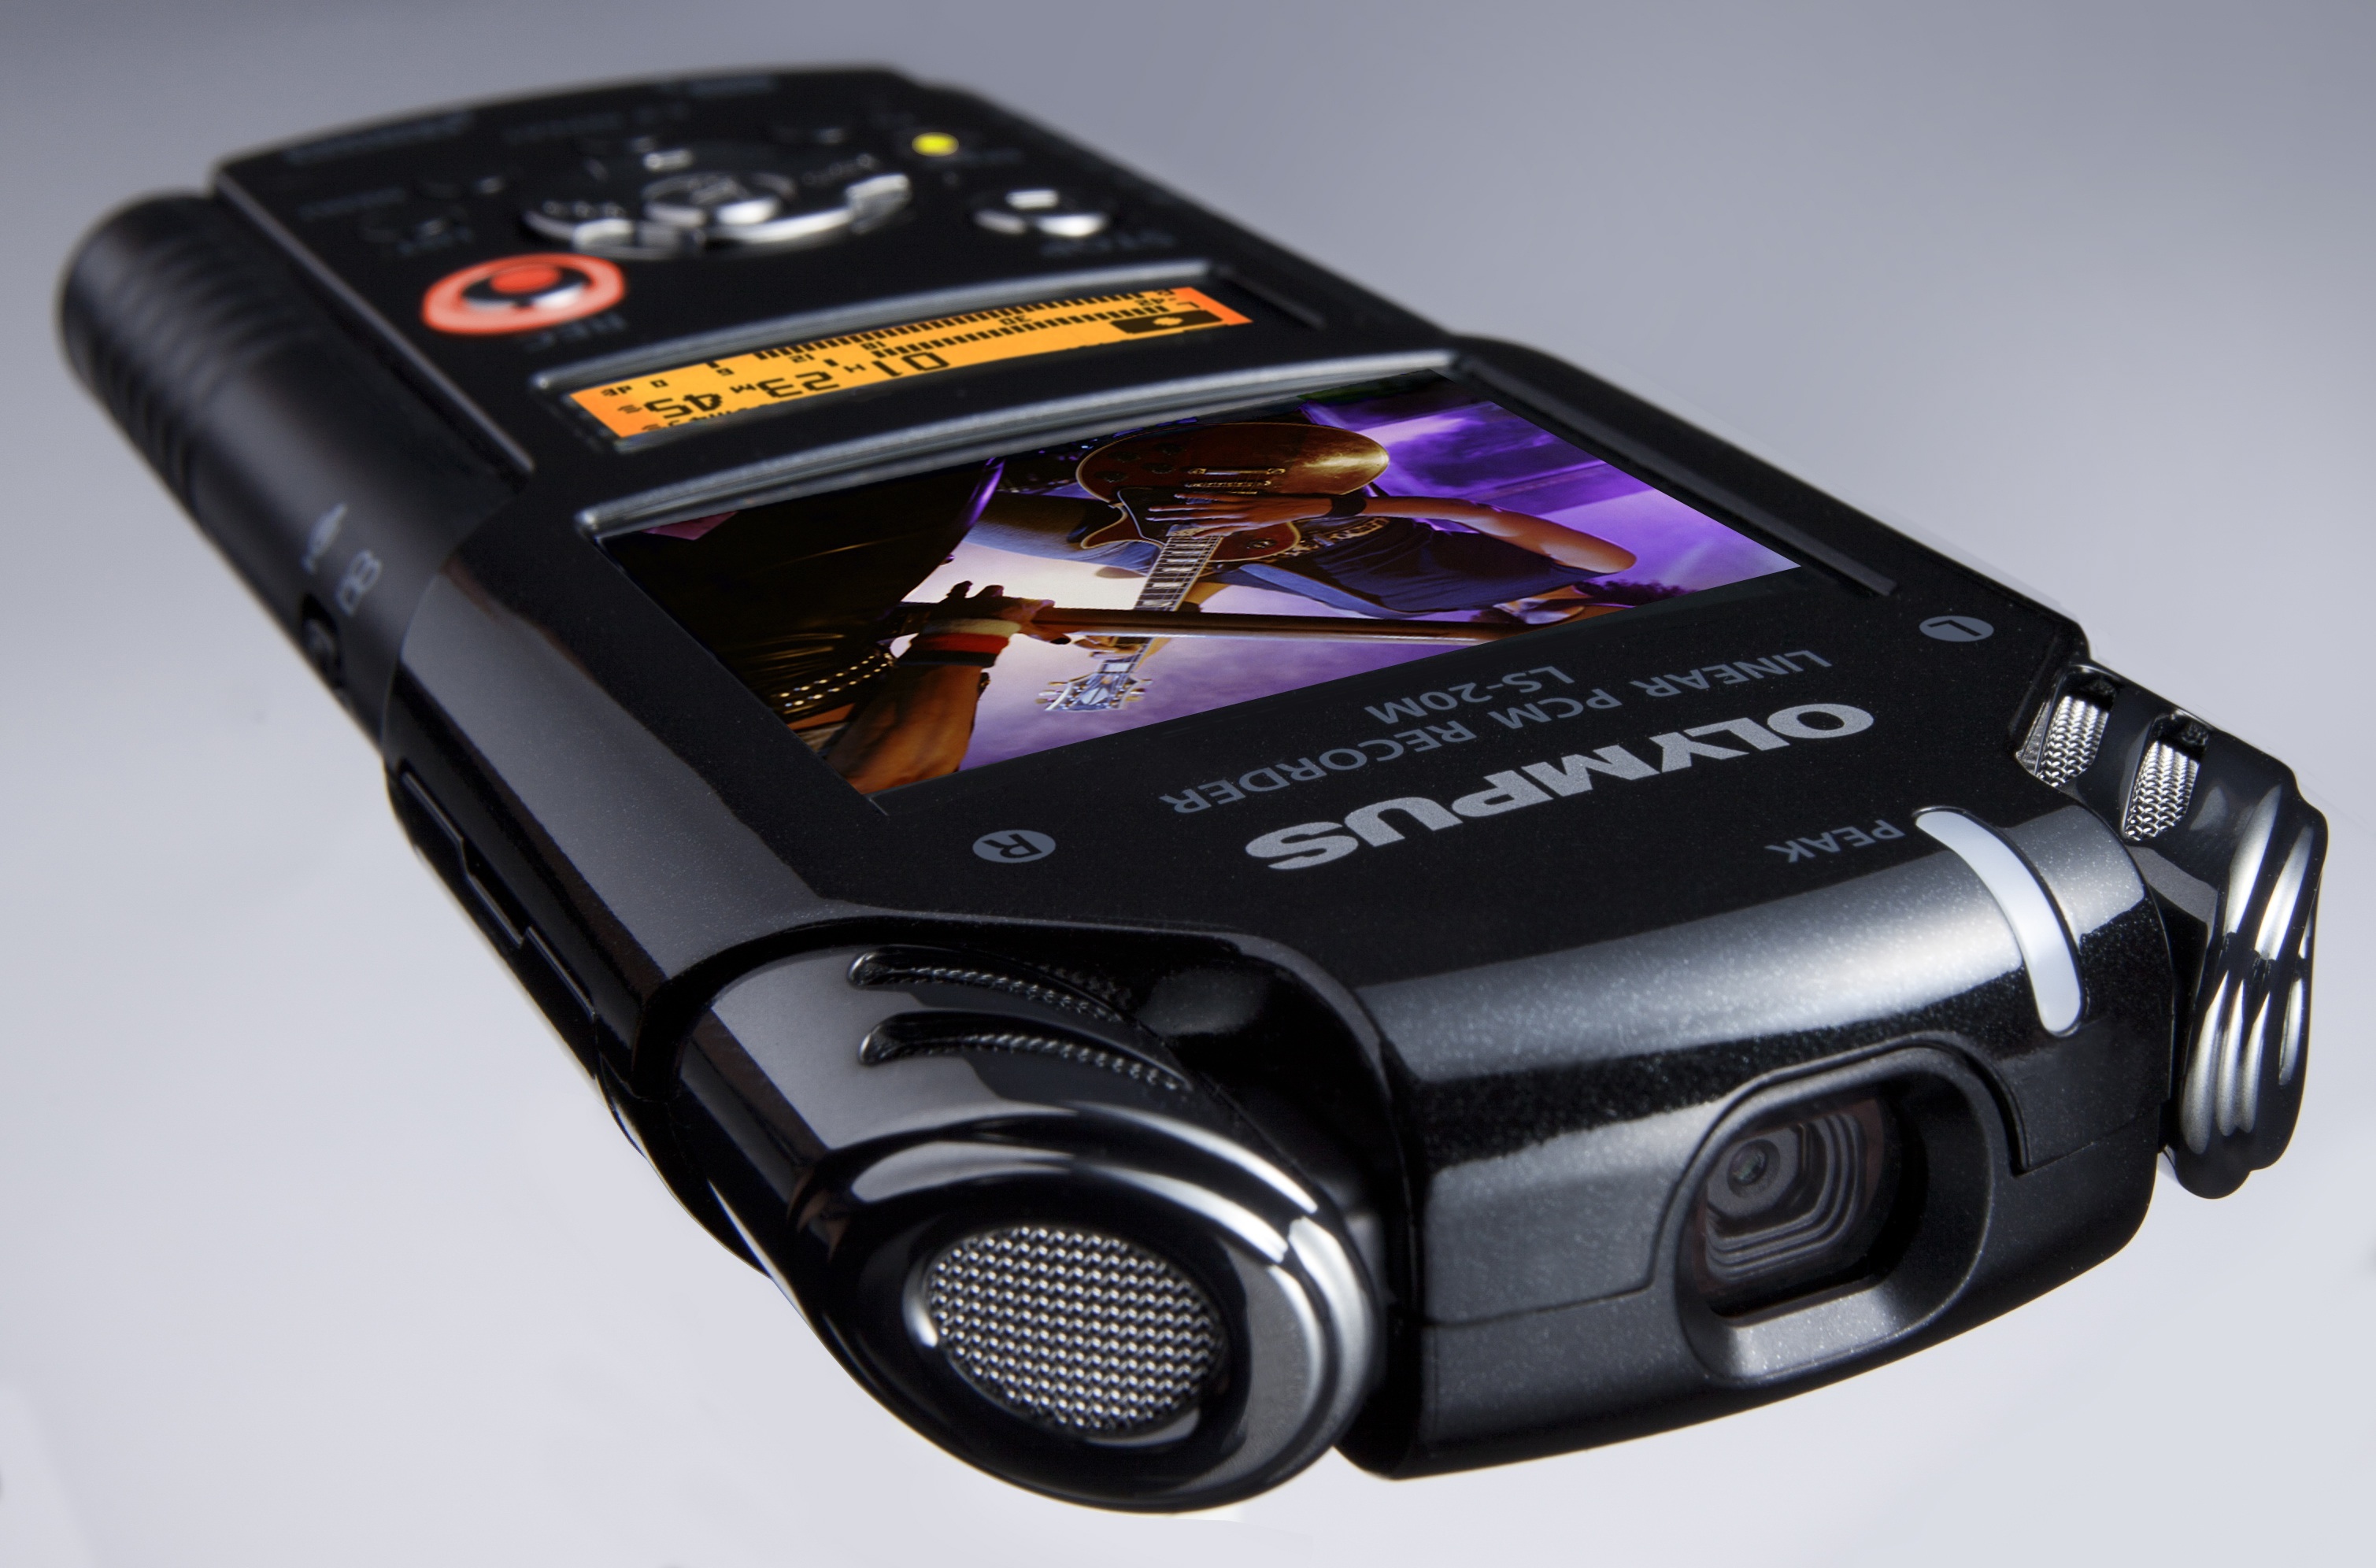 Olympus' New LS-20M Linear PCM Recorder Aims to Unite High-Definition Video and PCM Audio